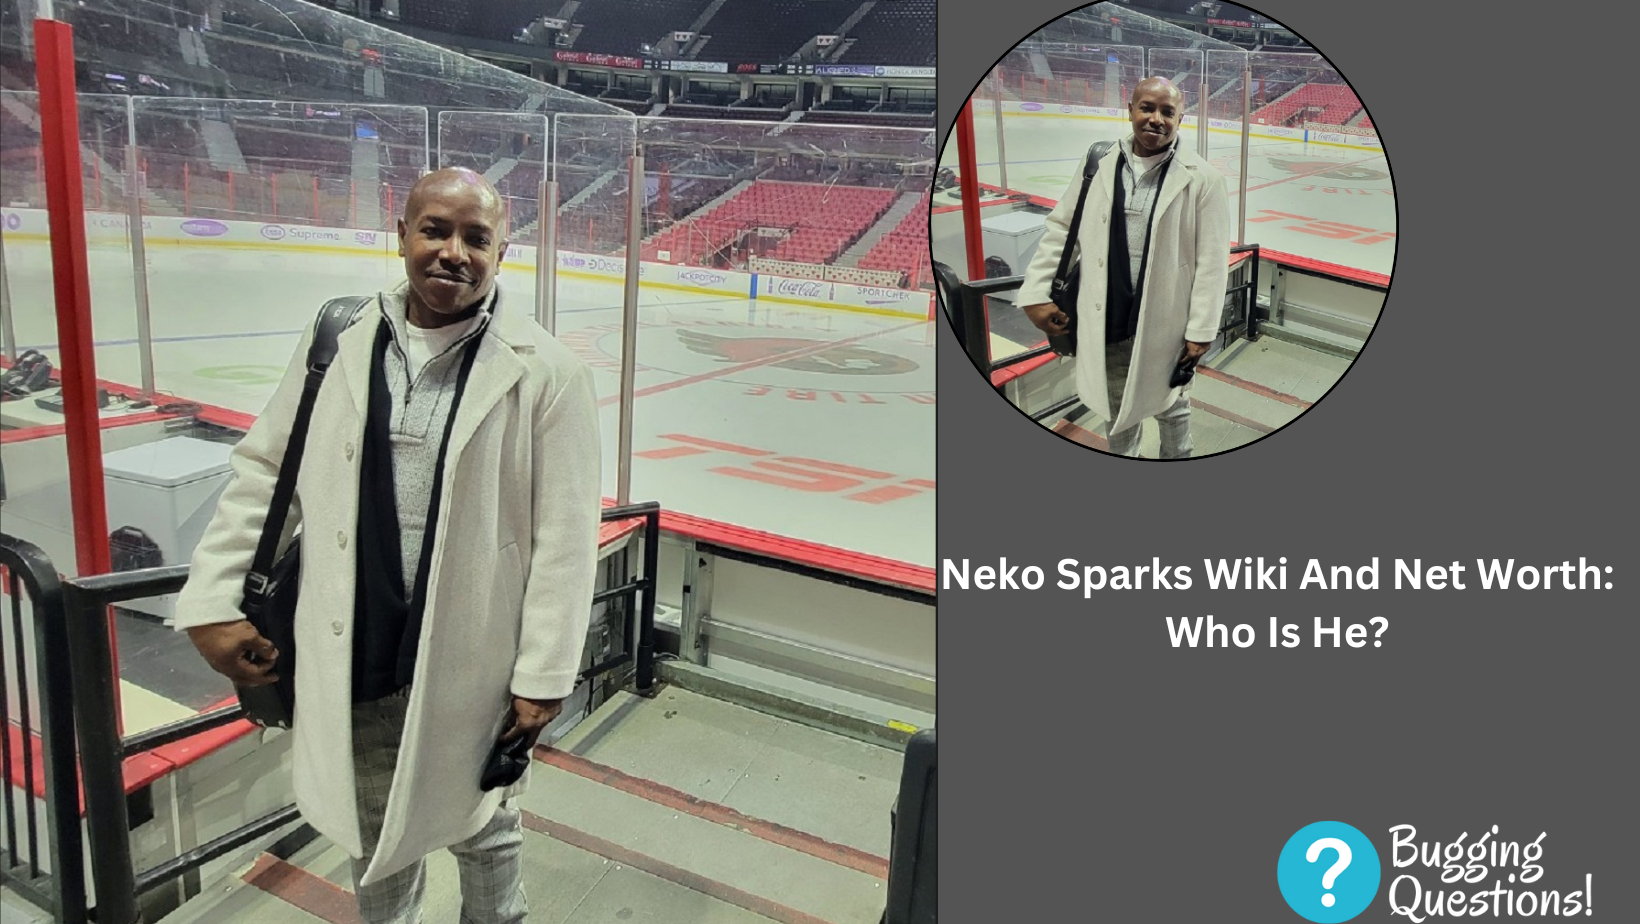 Neko Sparks Wiki And Net Worth: Who Is He?